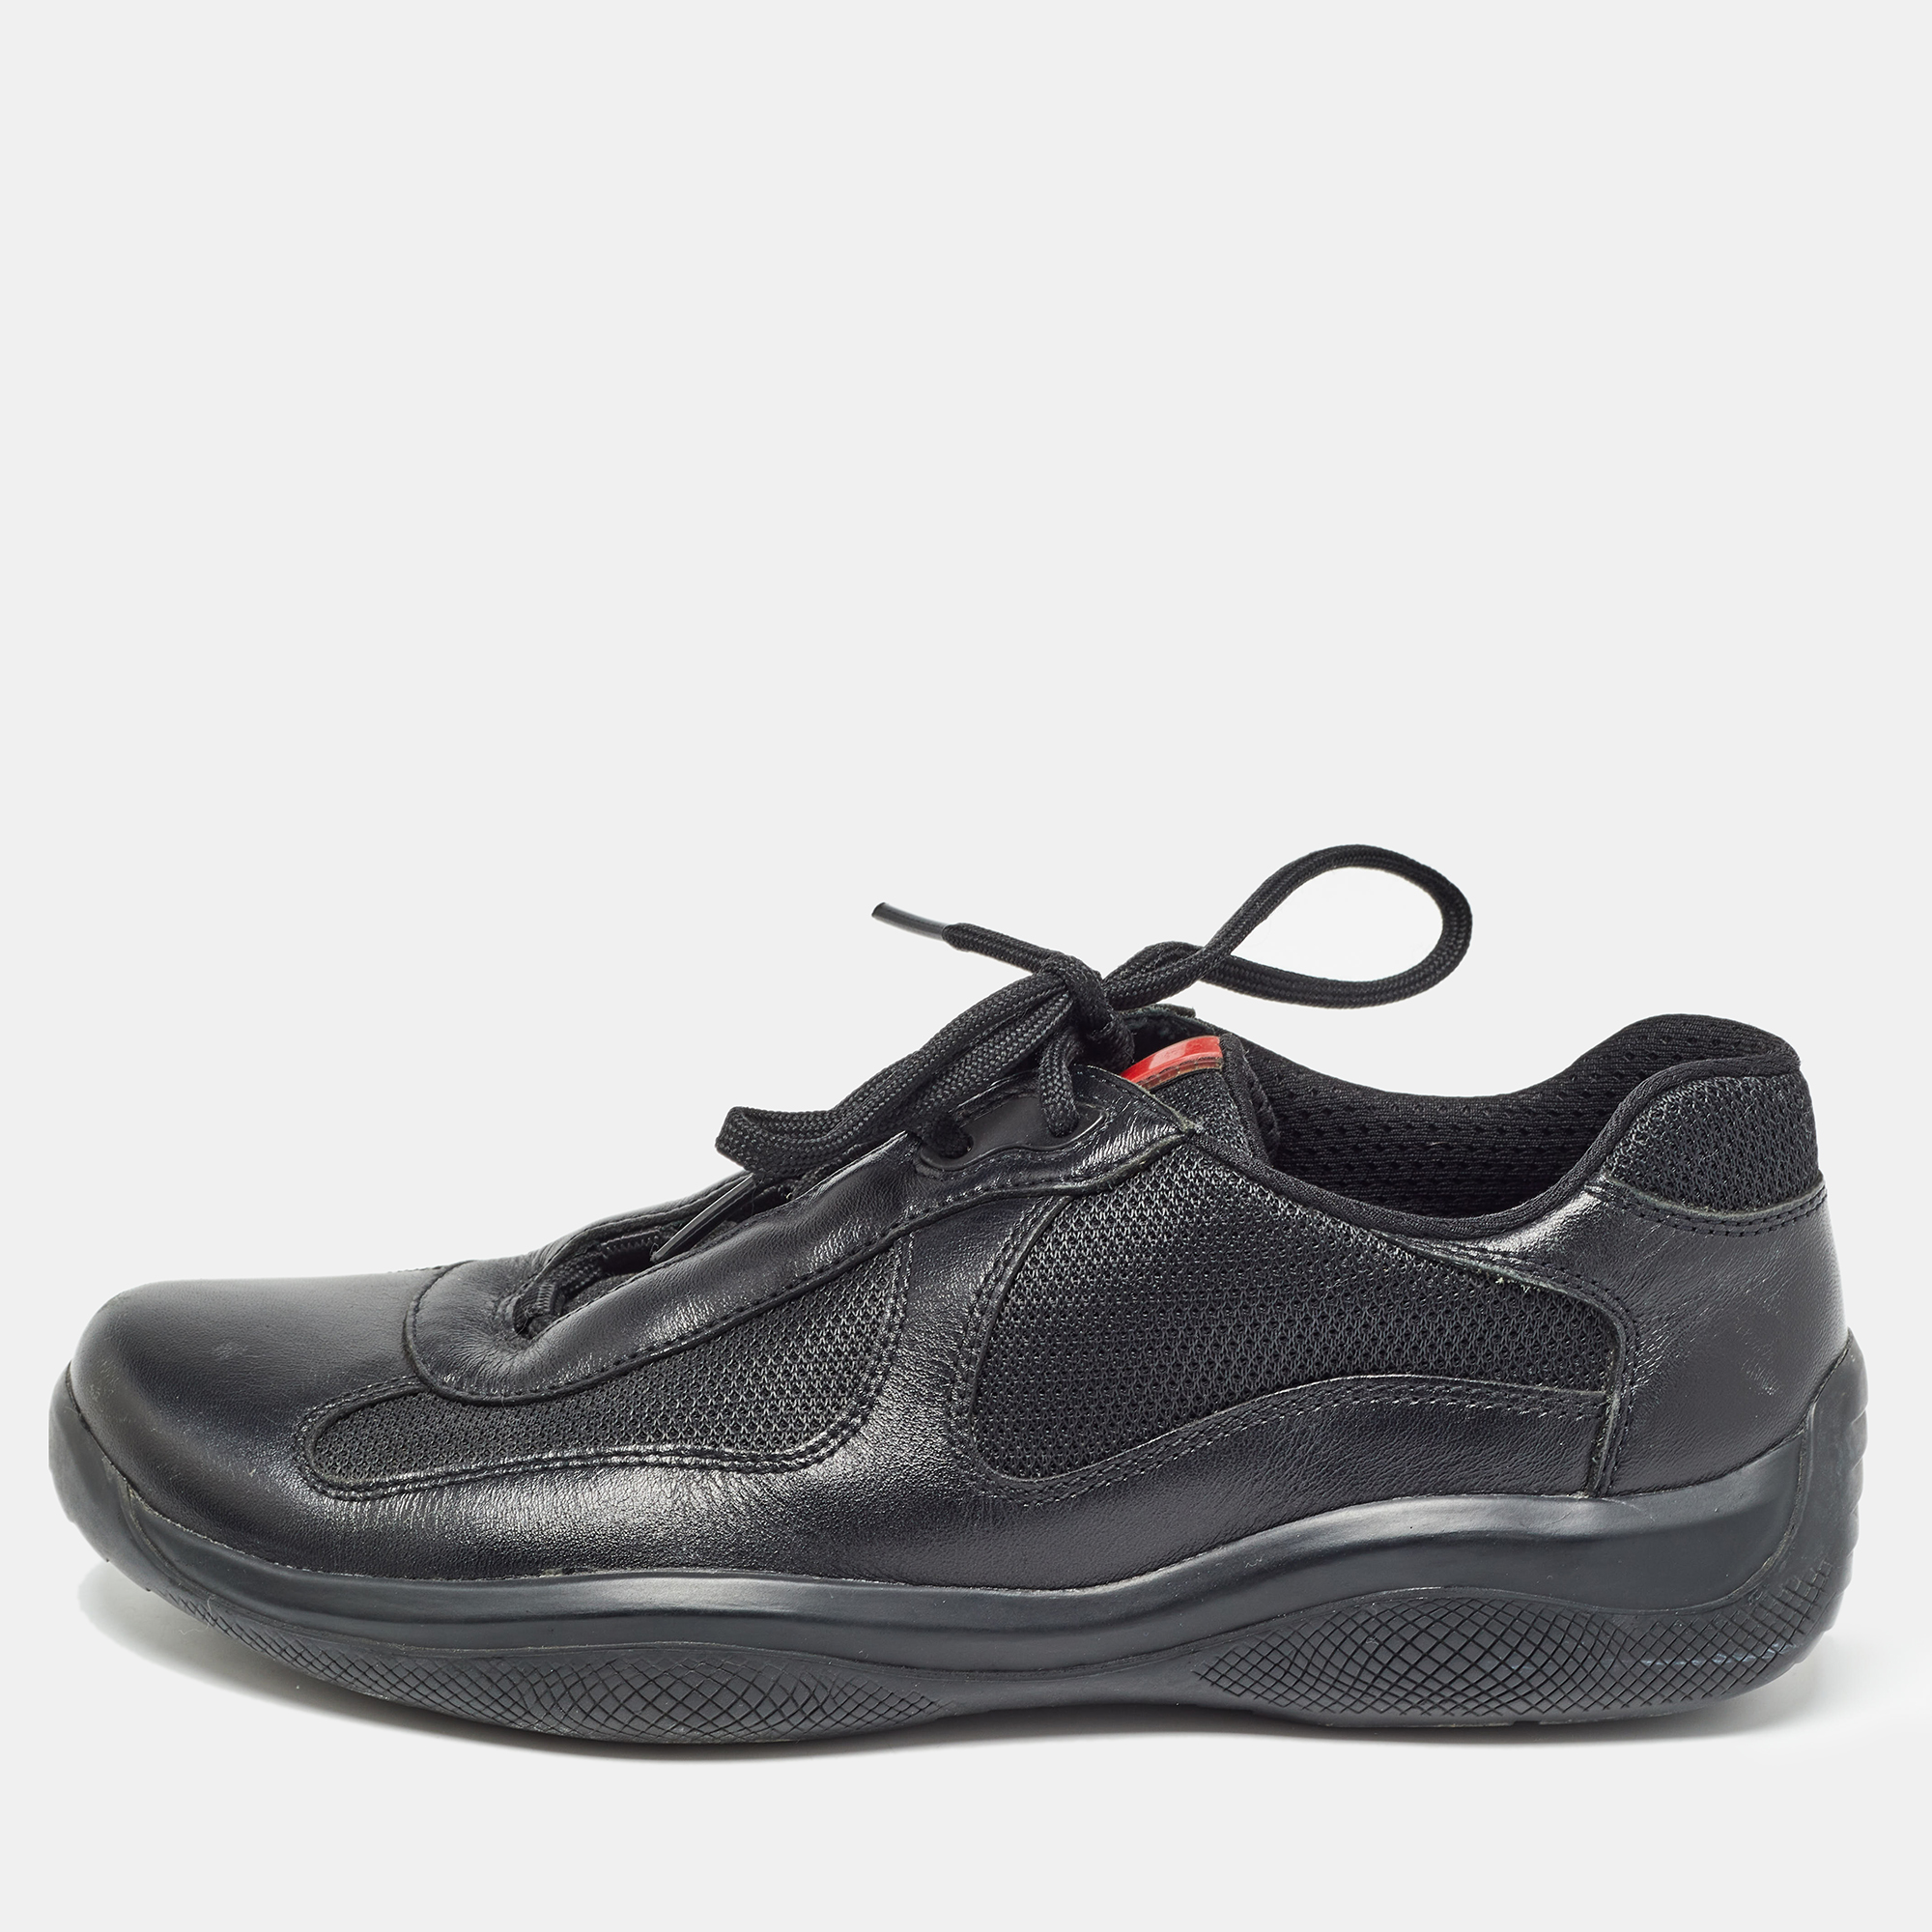 Prada sport black mesh and leather low top sneakers size 40